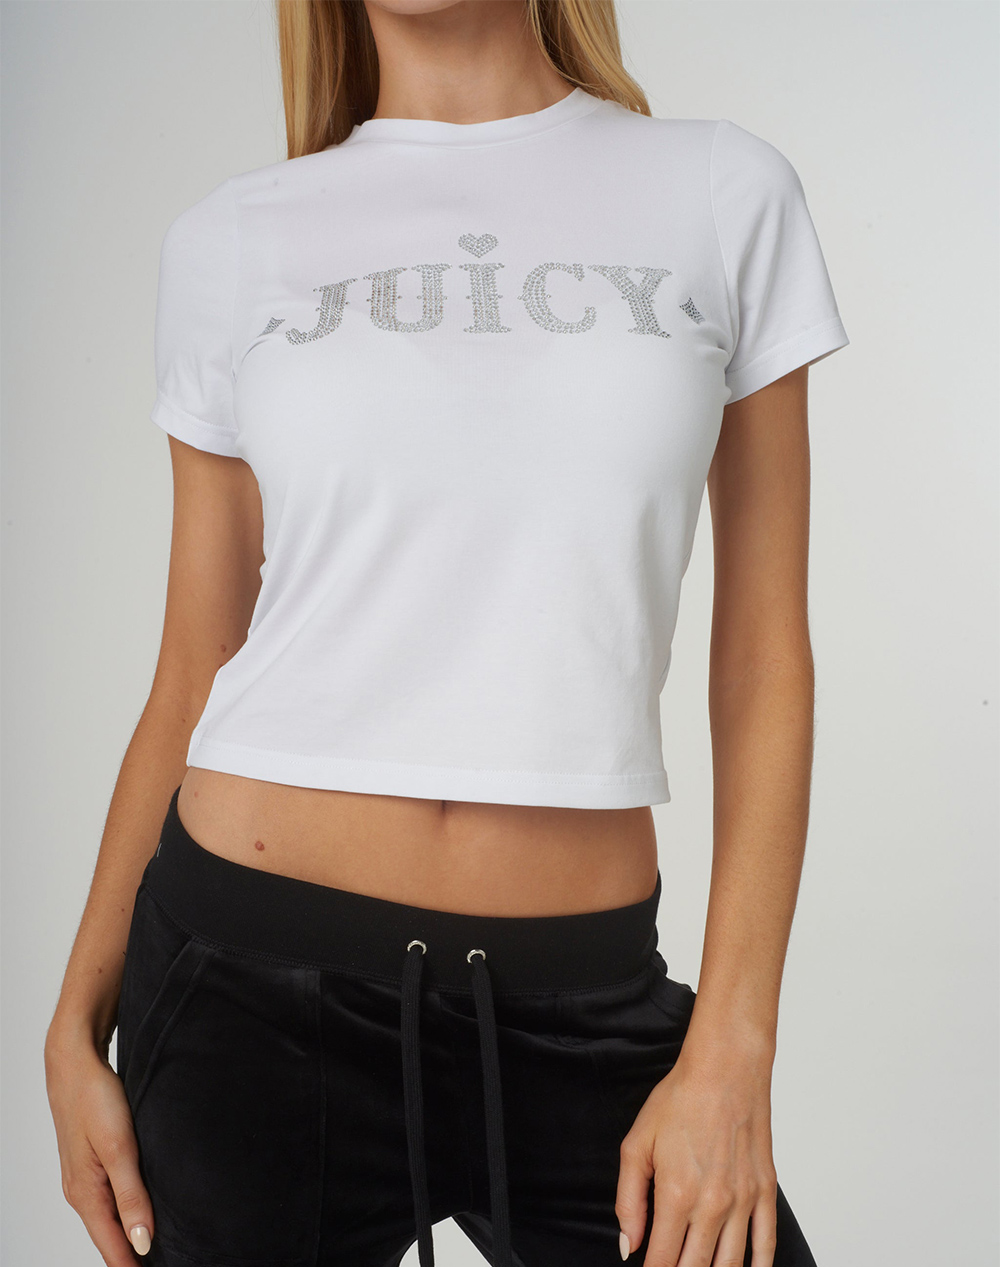 JUICY COUTURE RYDER RODEO FITTED T-SHIRT JCBCT223826-117 White